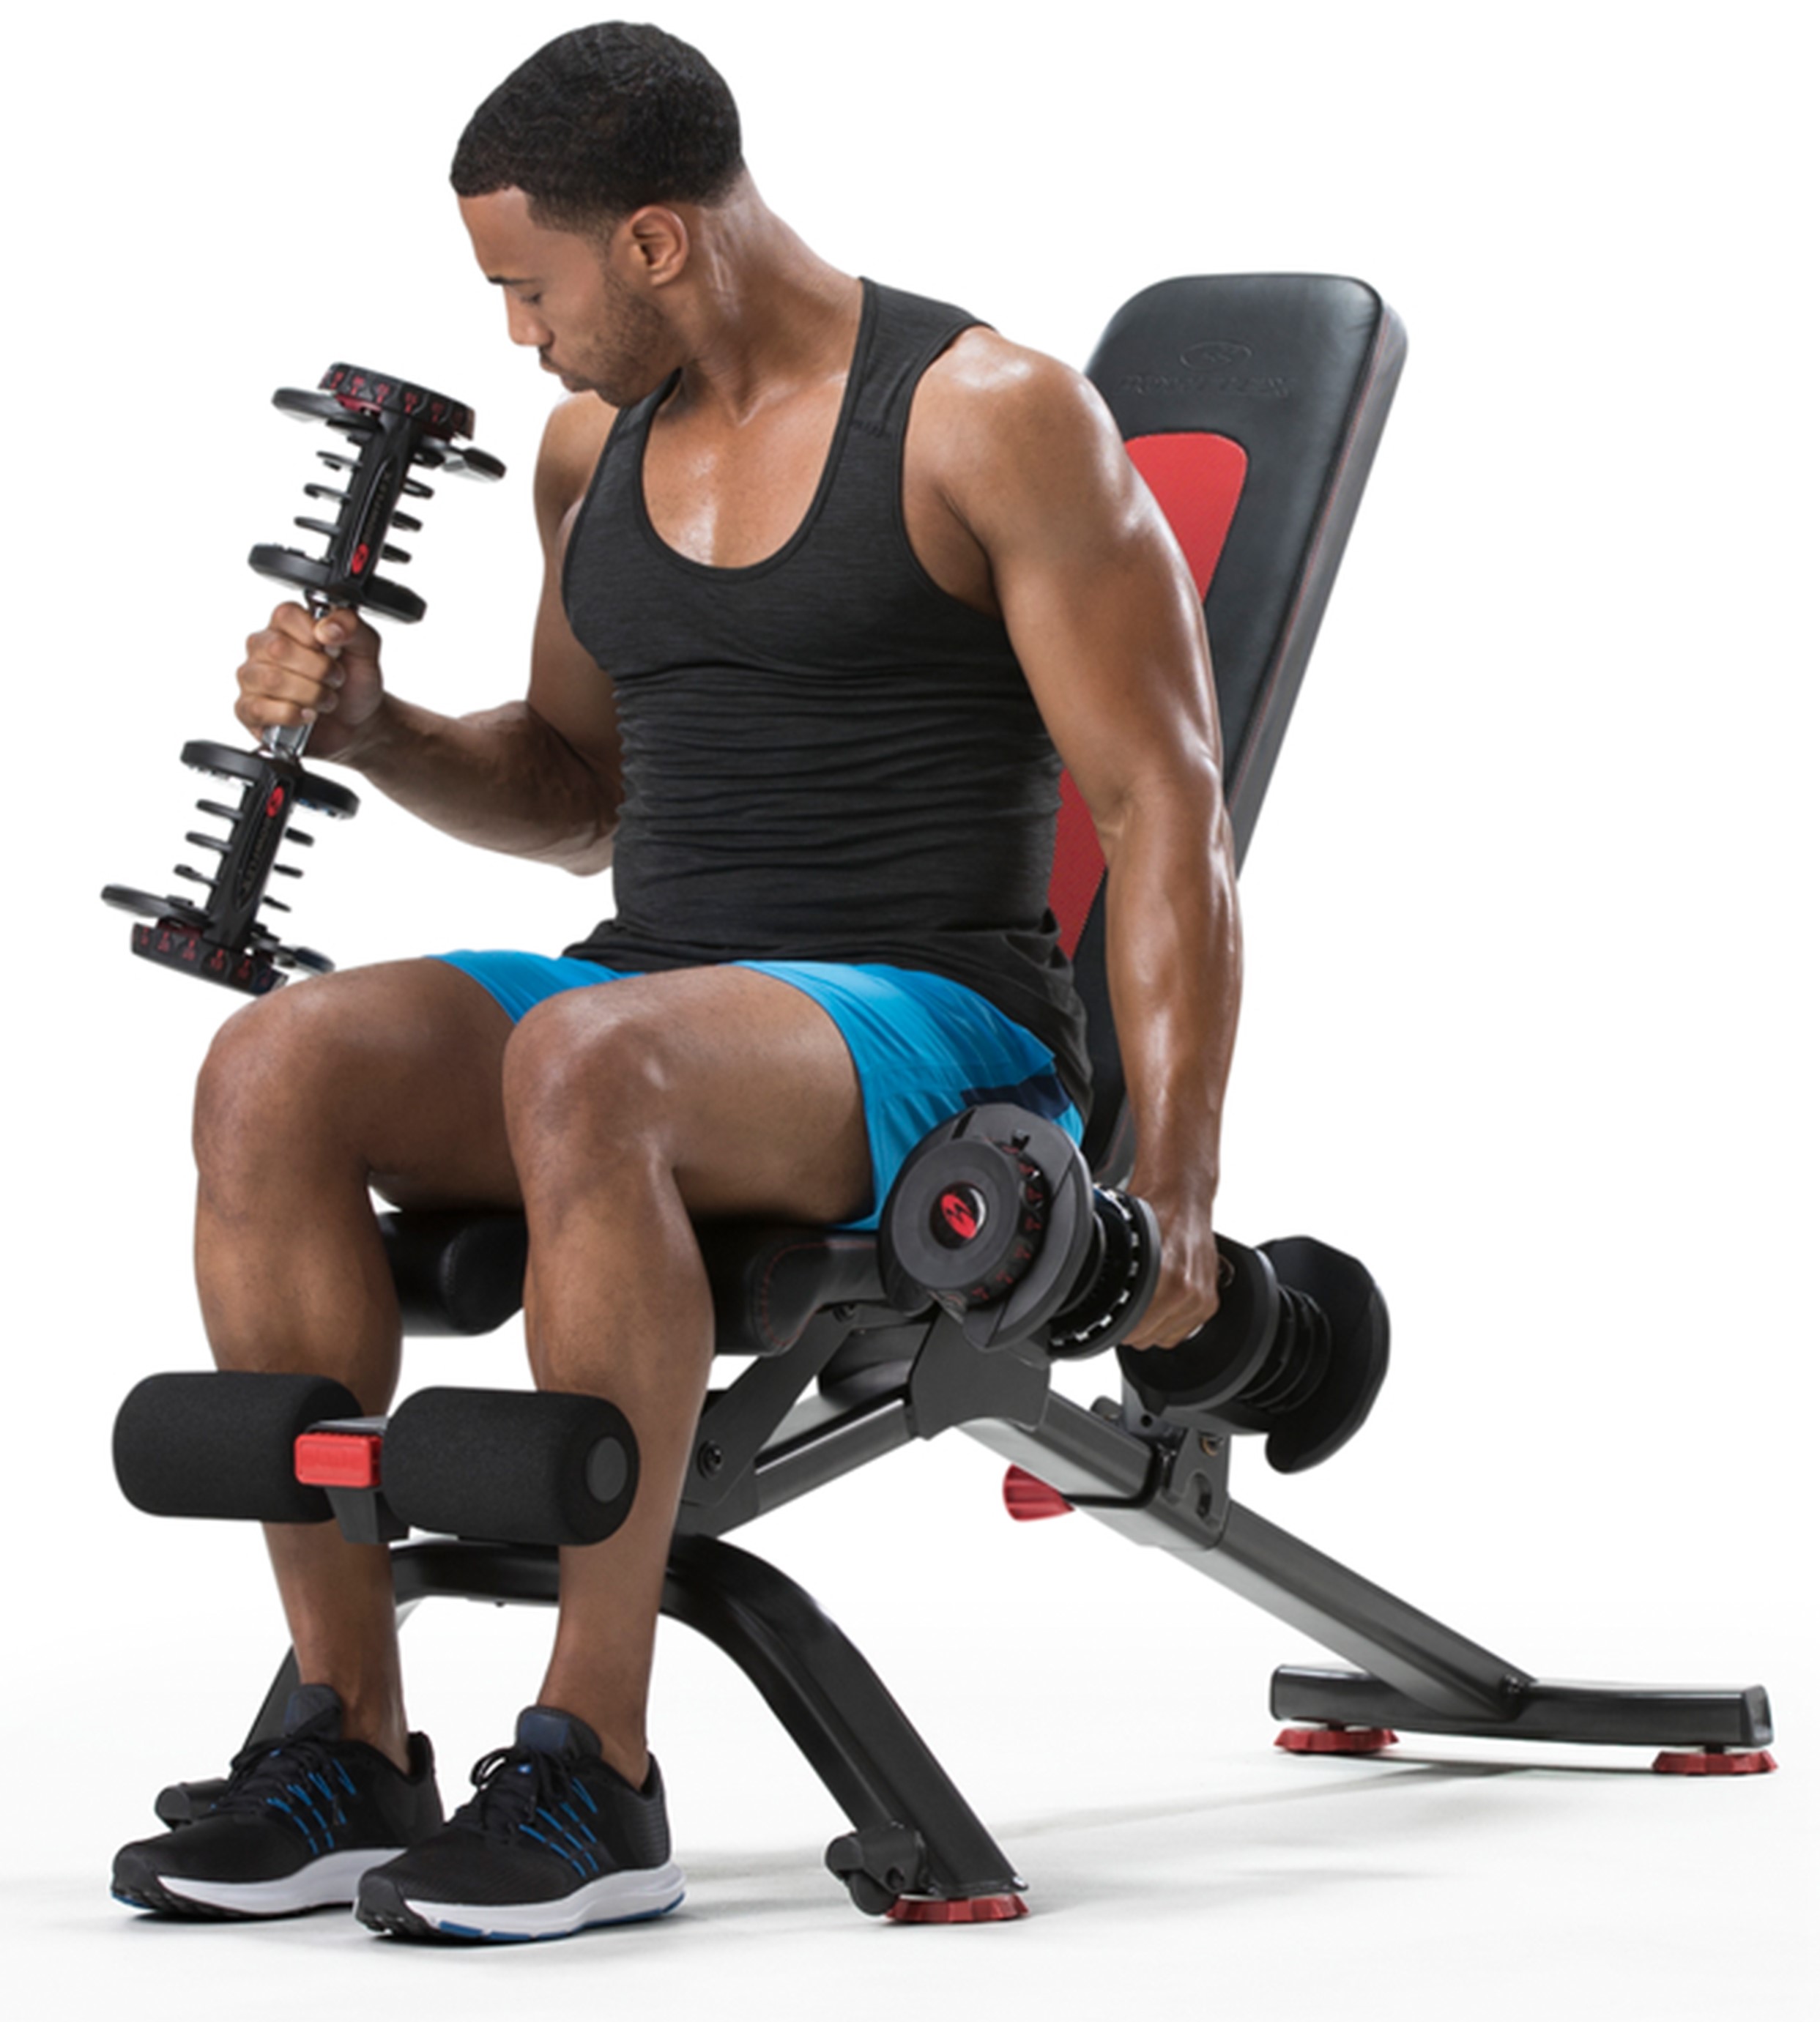 Bowflex 5.1S Stowable 6 Position Adjustable Bench - image 4 of 9